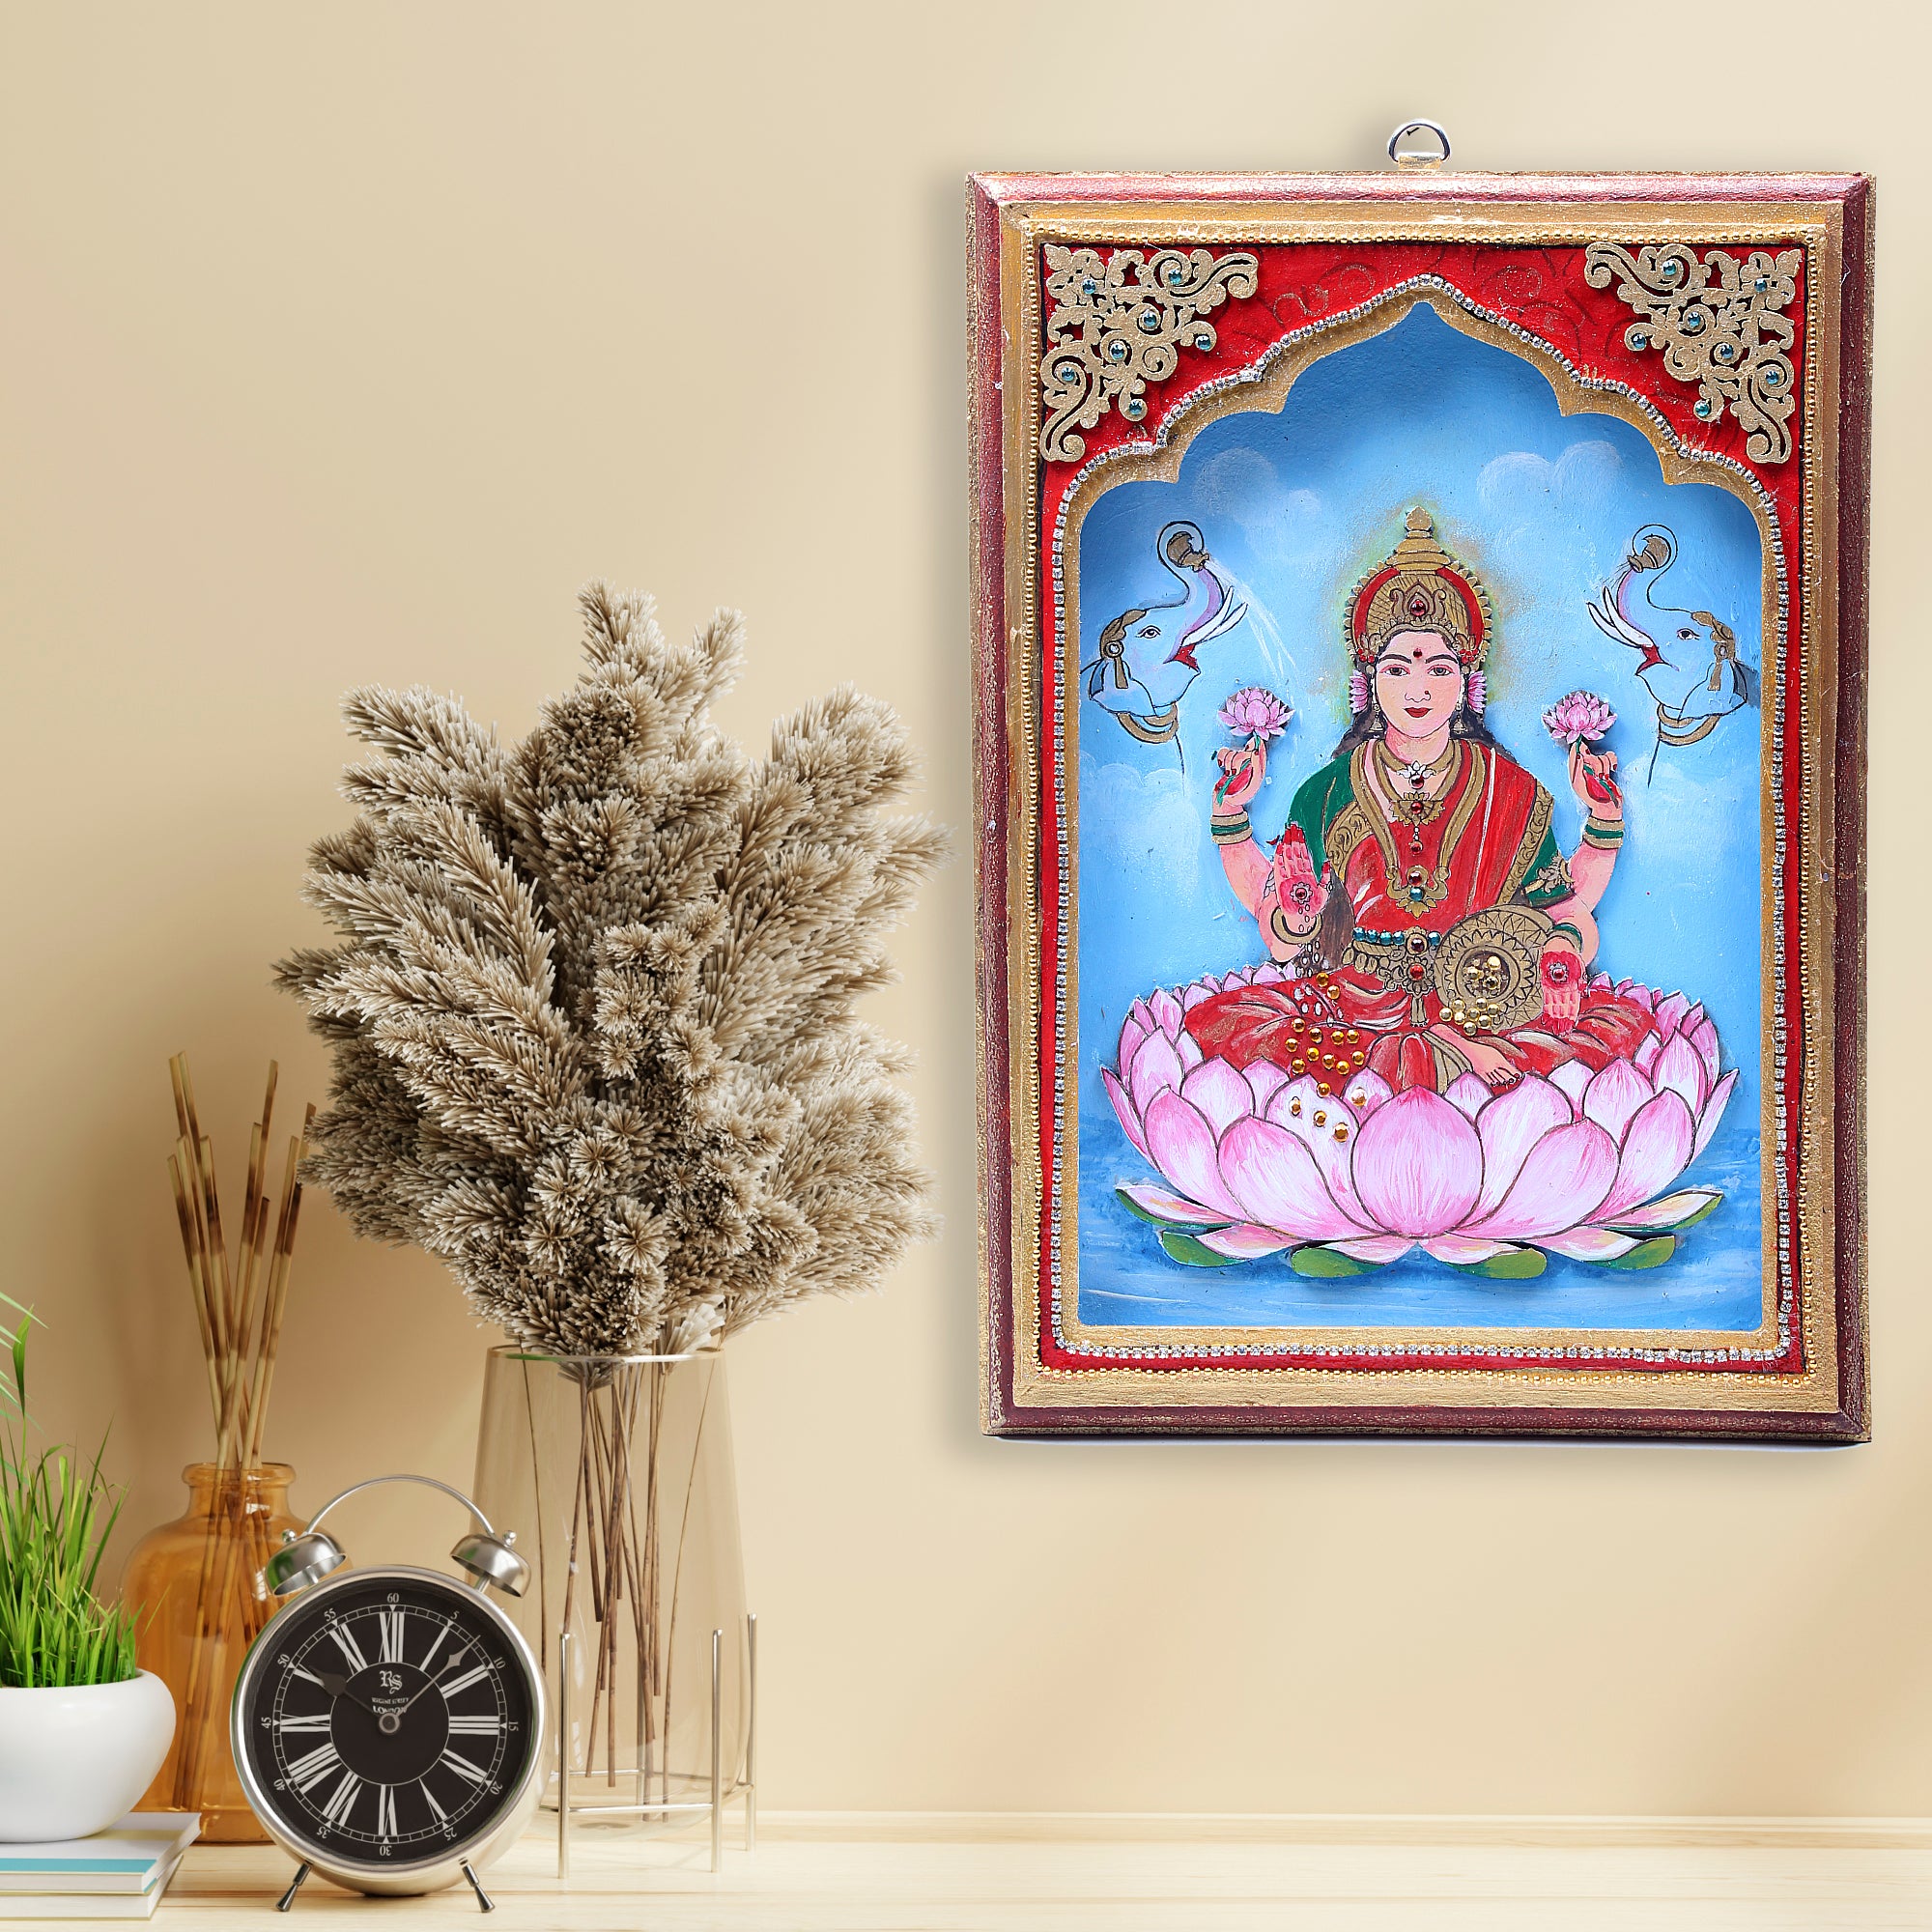 Pre -Marked MDF Hanging Decor with D-Ring - Gracious Lakshmi Frame. Size-12in x 8.5in